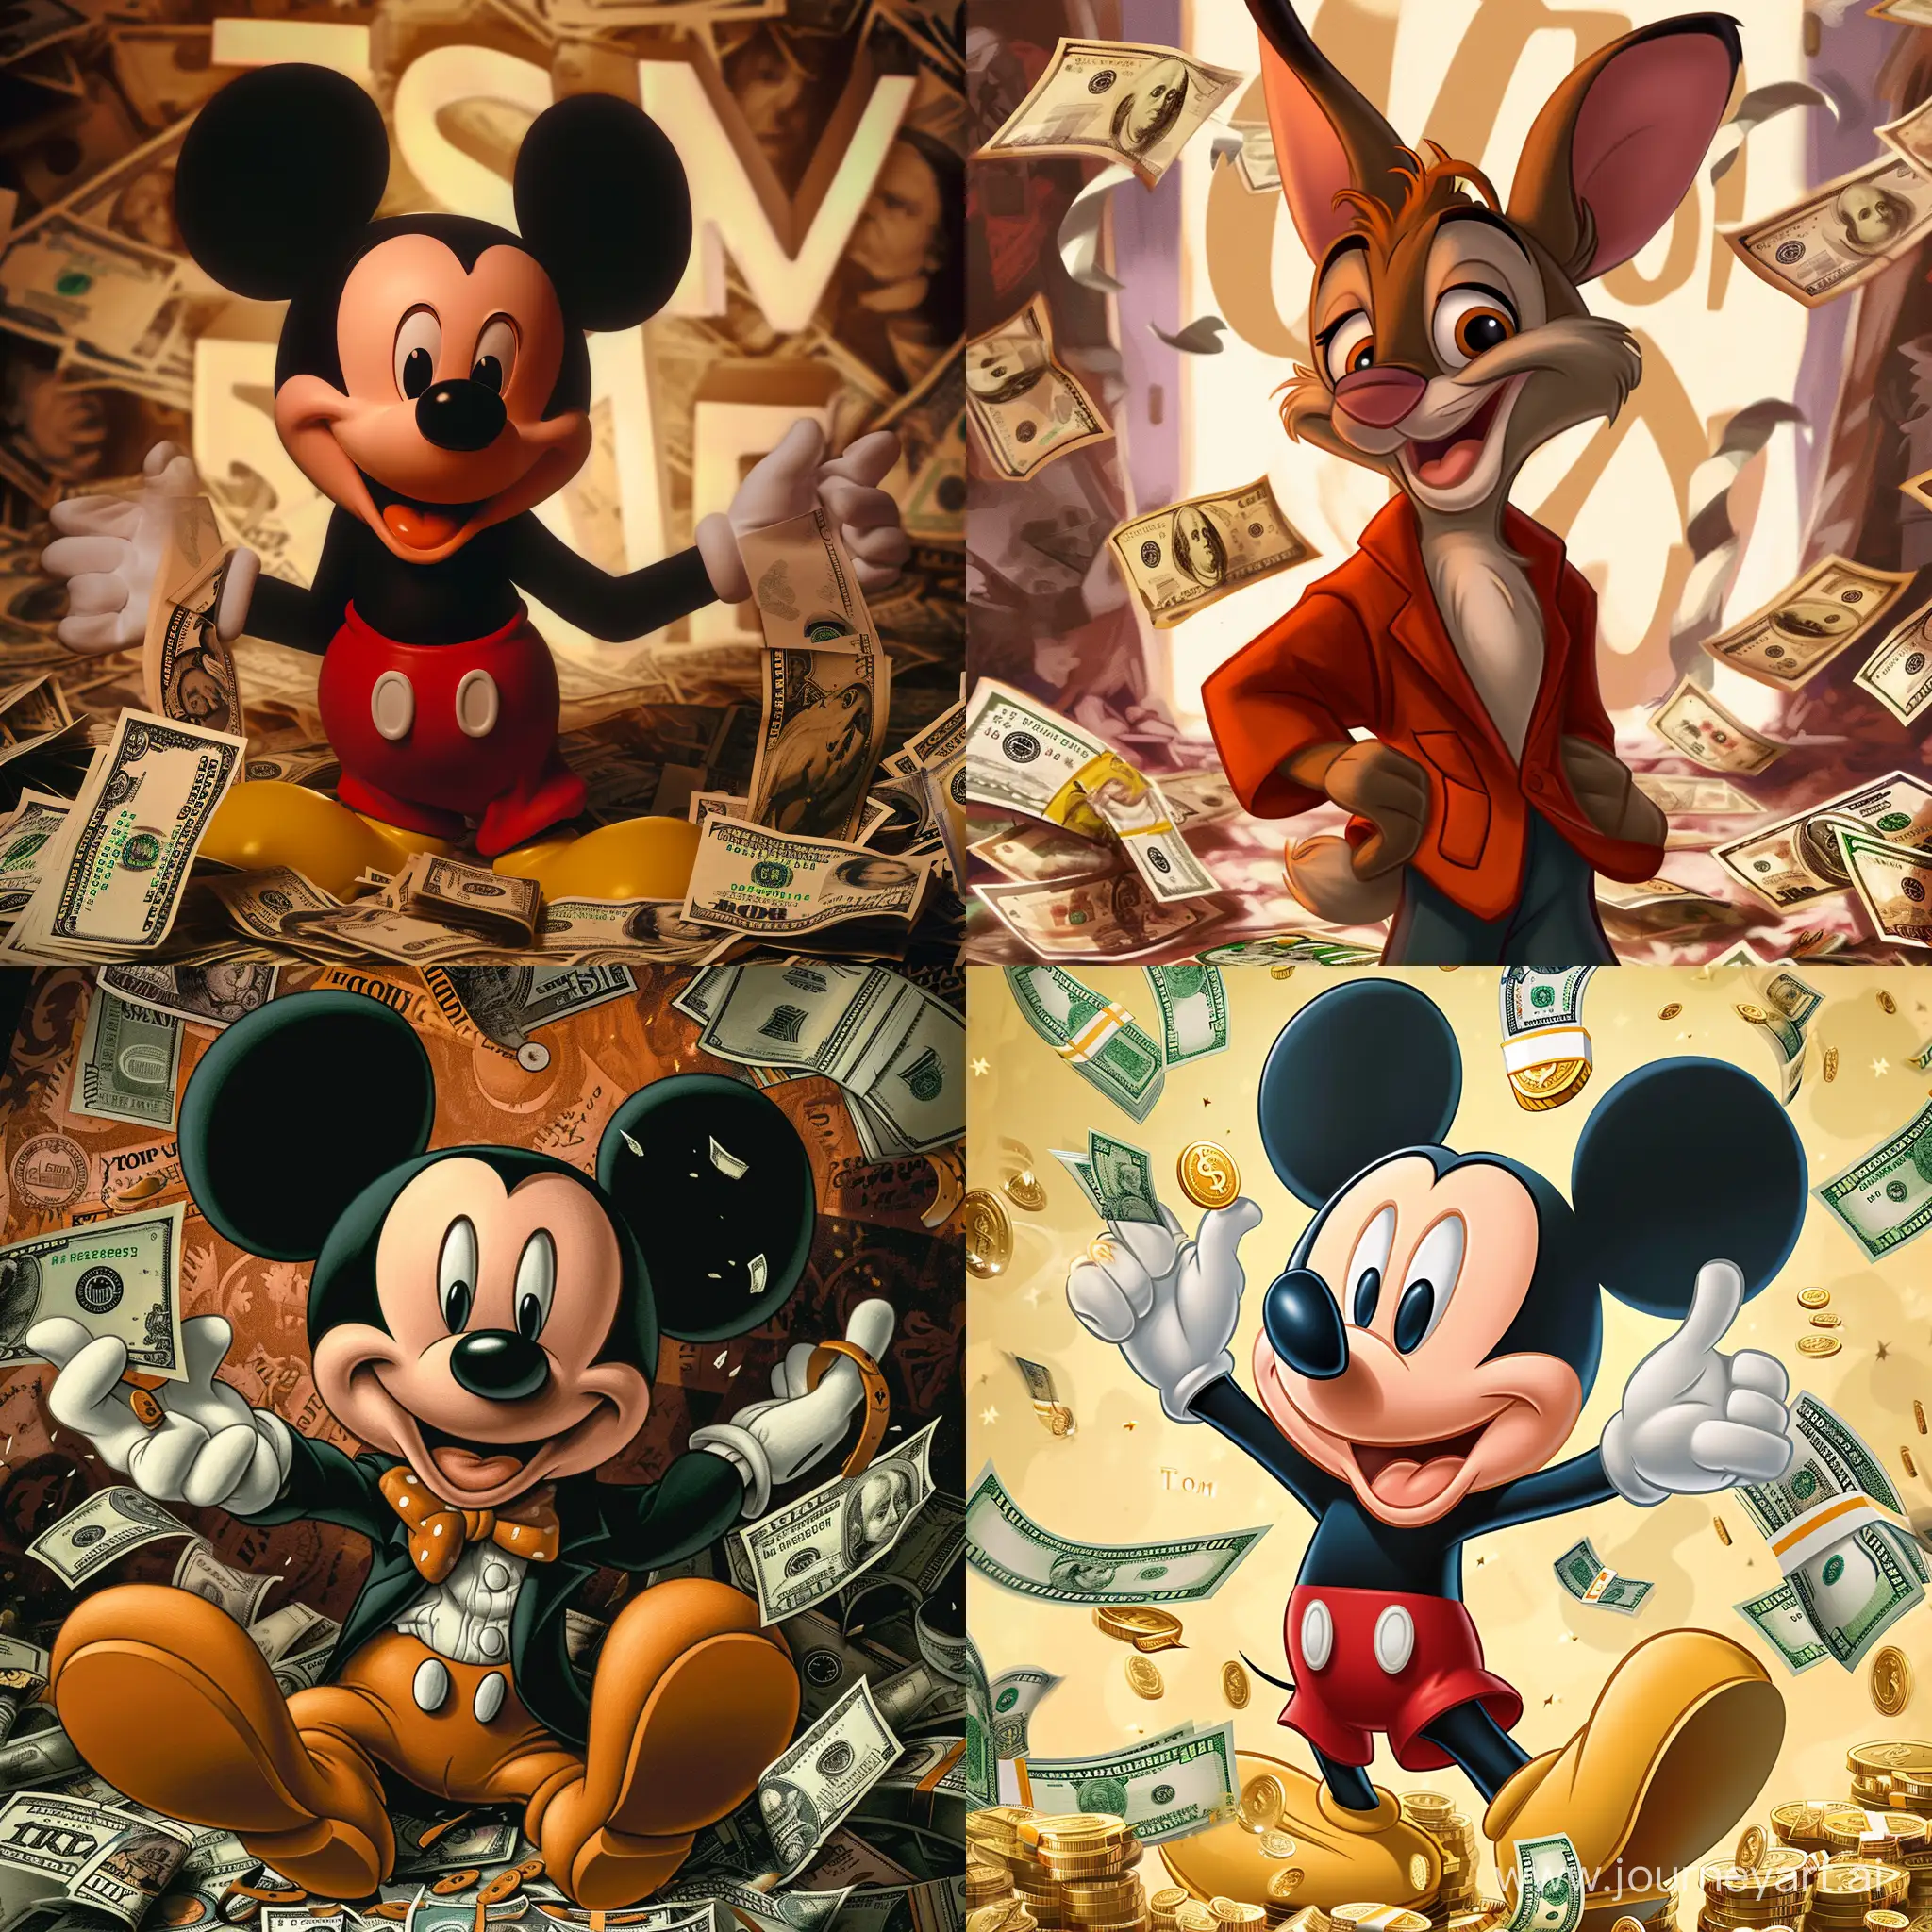 Disney-Character-Surrounded-by-Wealth-with-Tom-Inscription